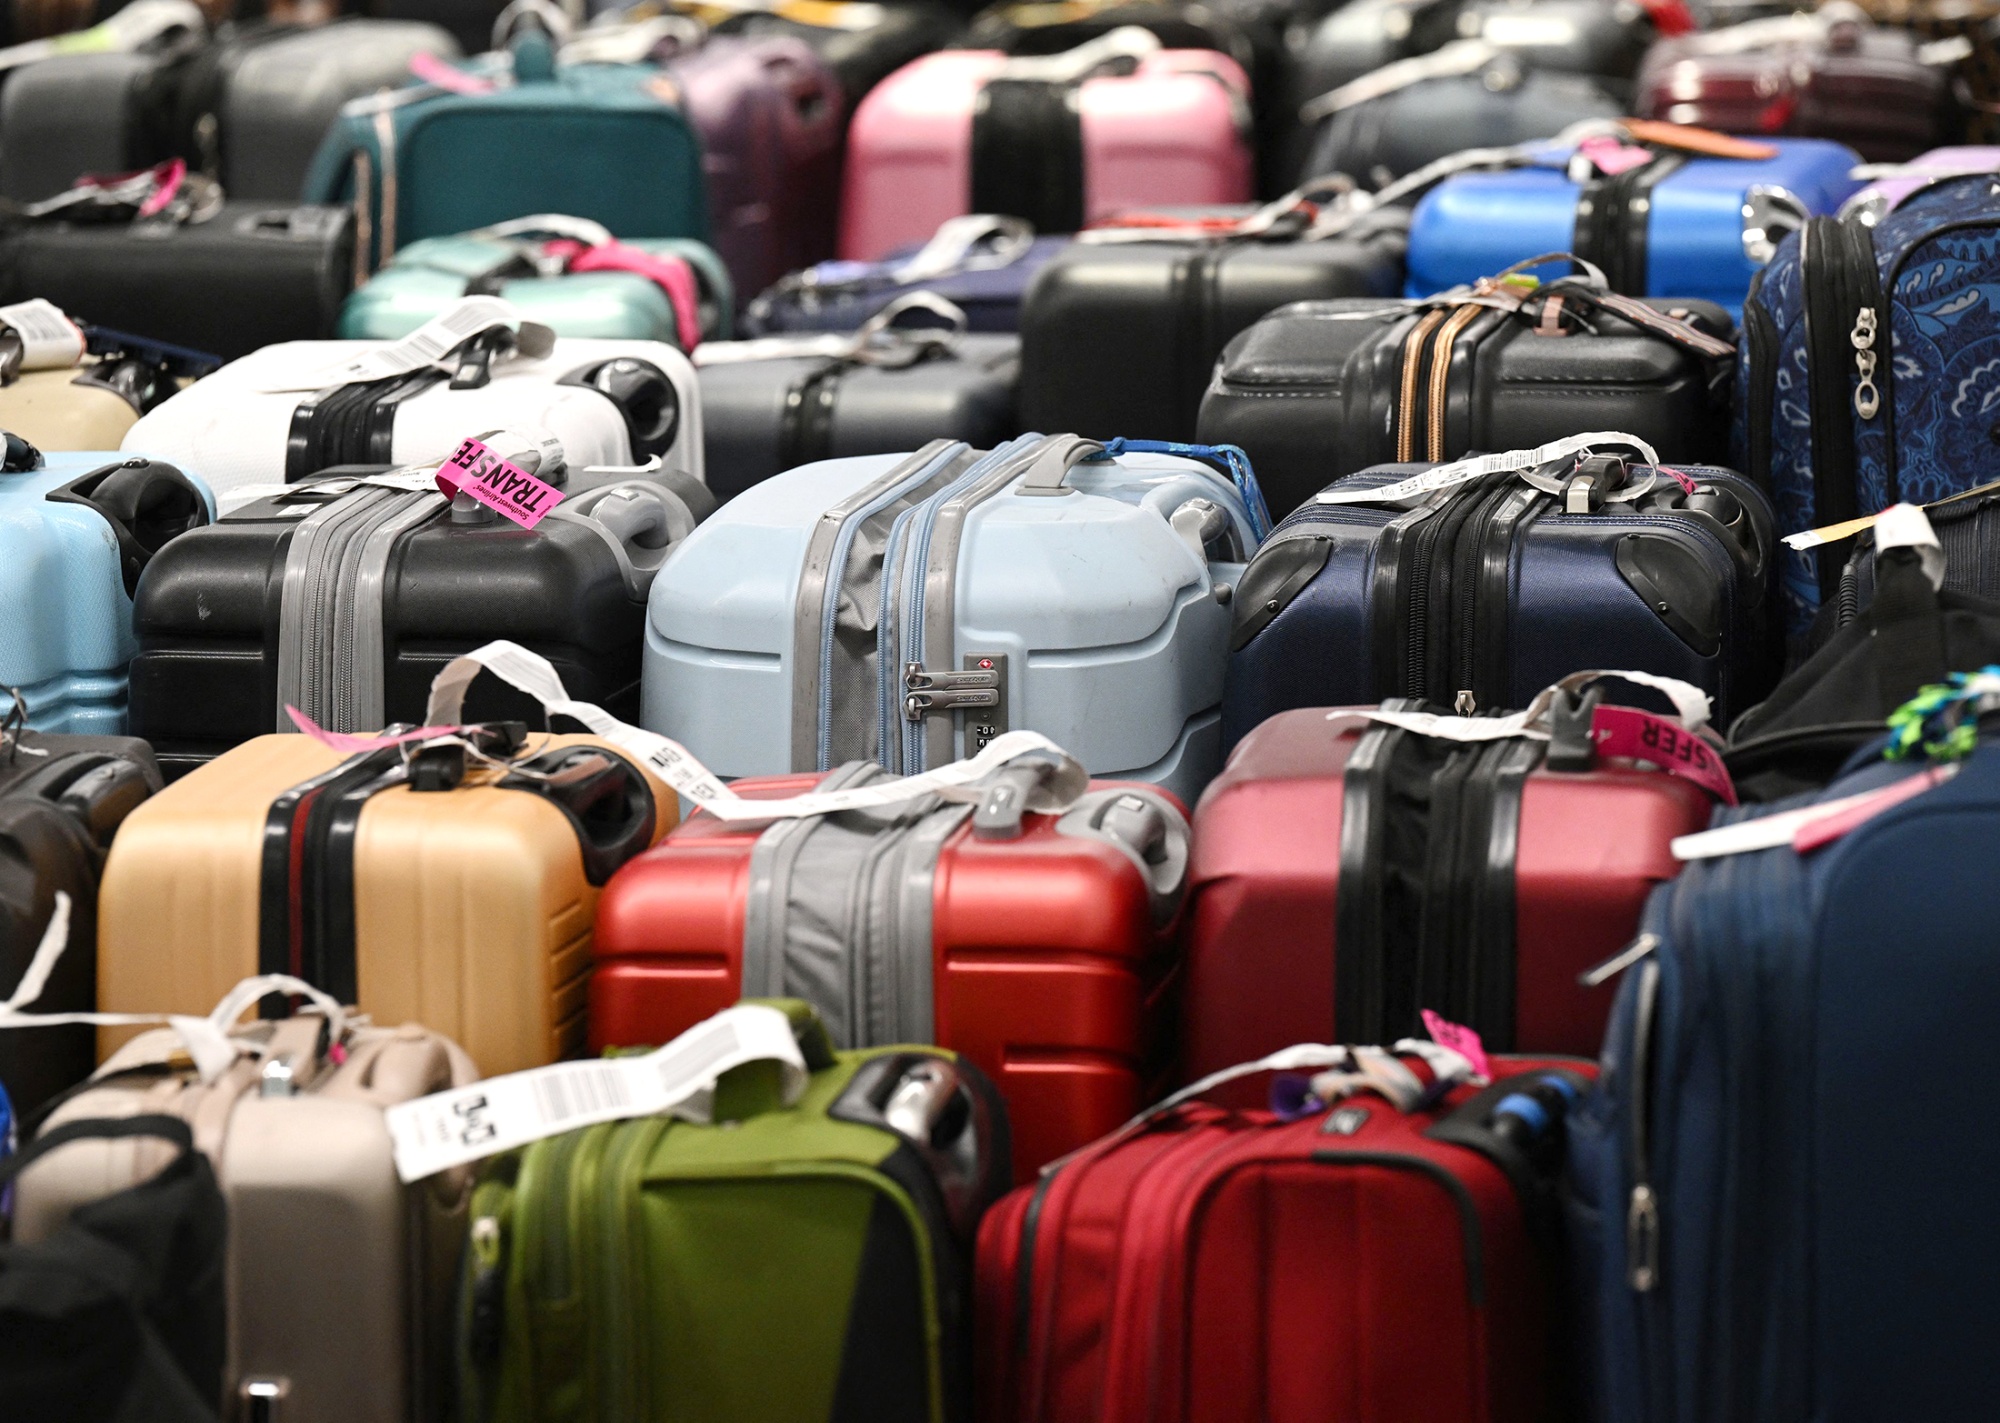 The Airline Lost My Luggage. What Should I Do? | Allianz Global Assistance